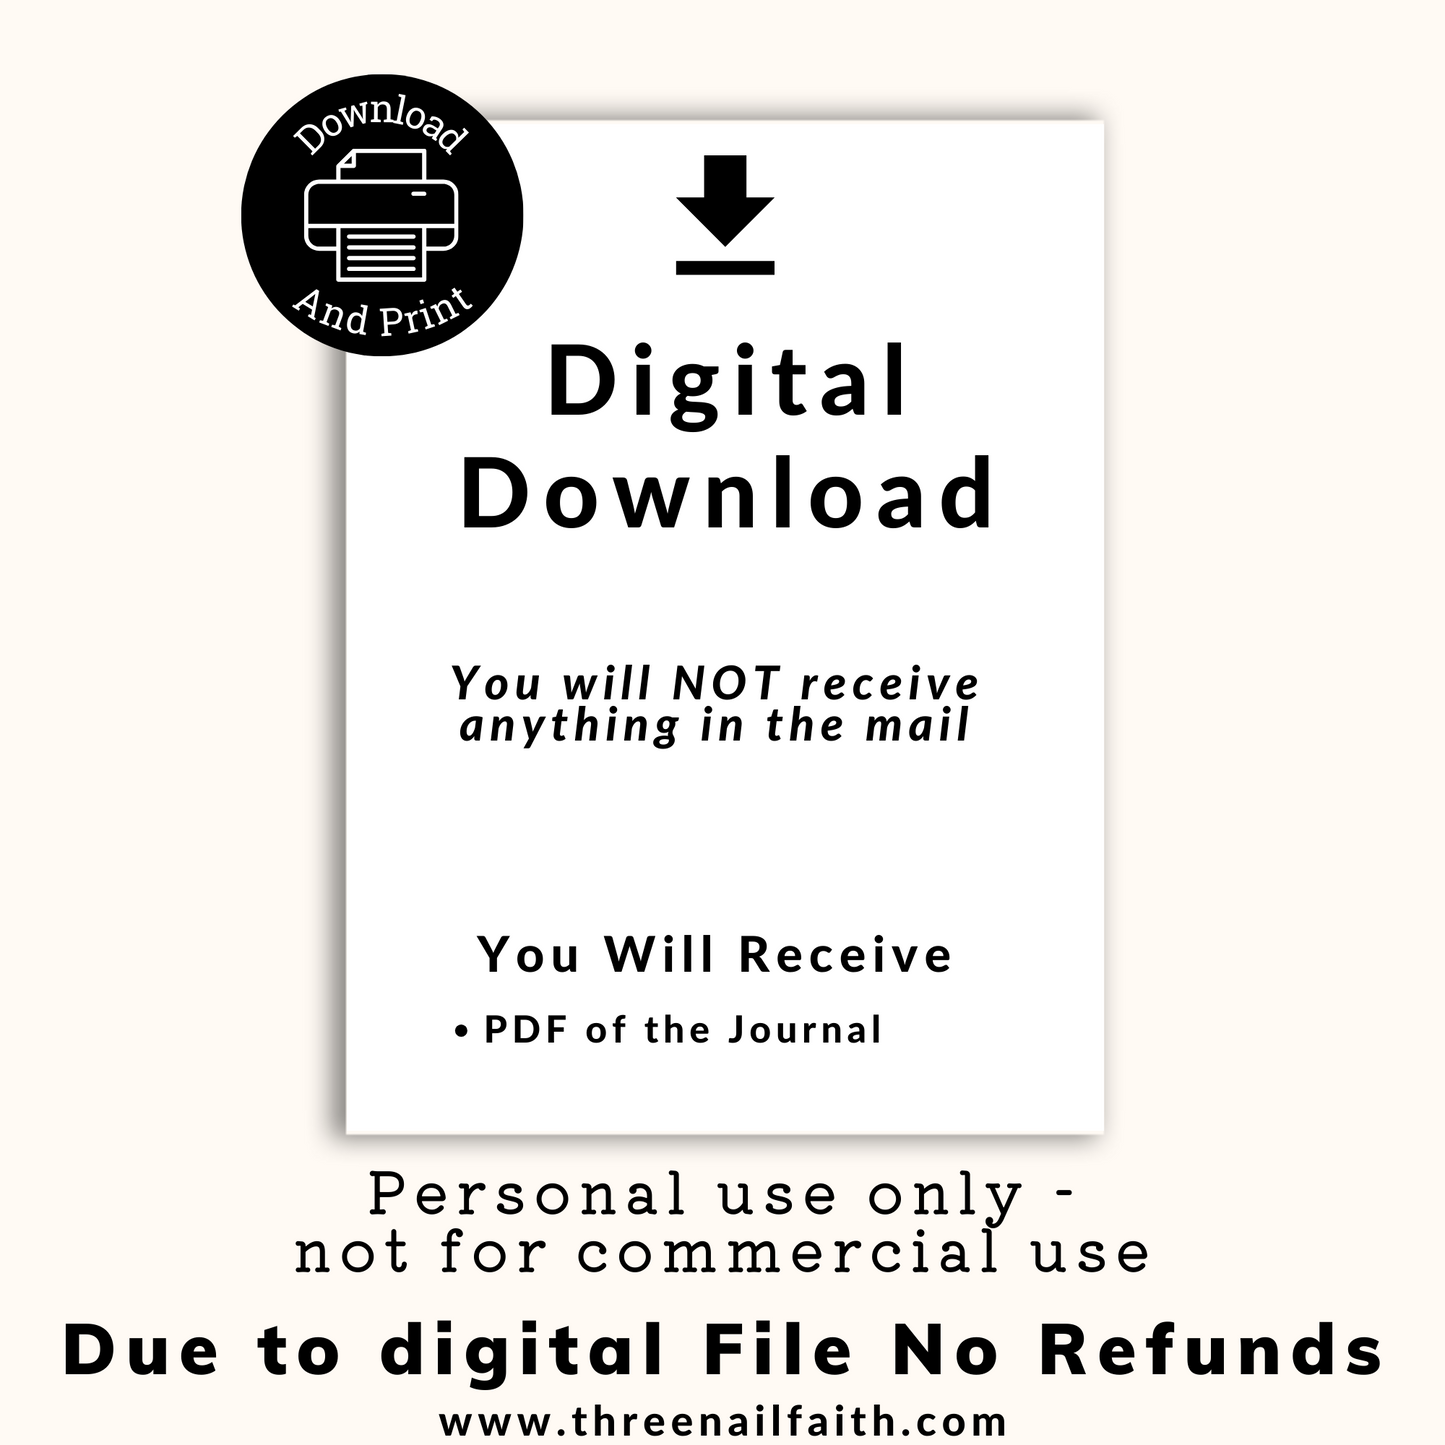 This is a digital download. nothing will be sent to you.